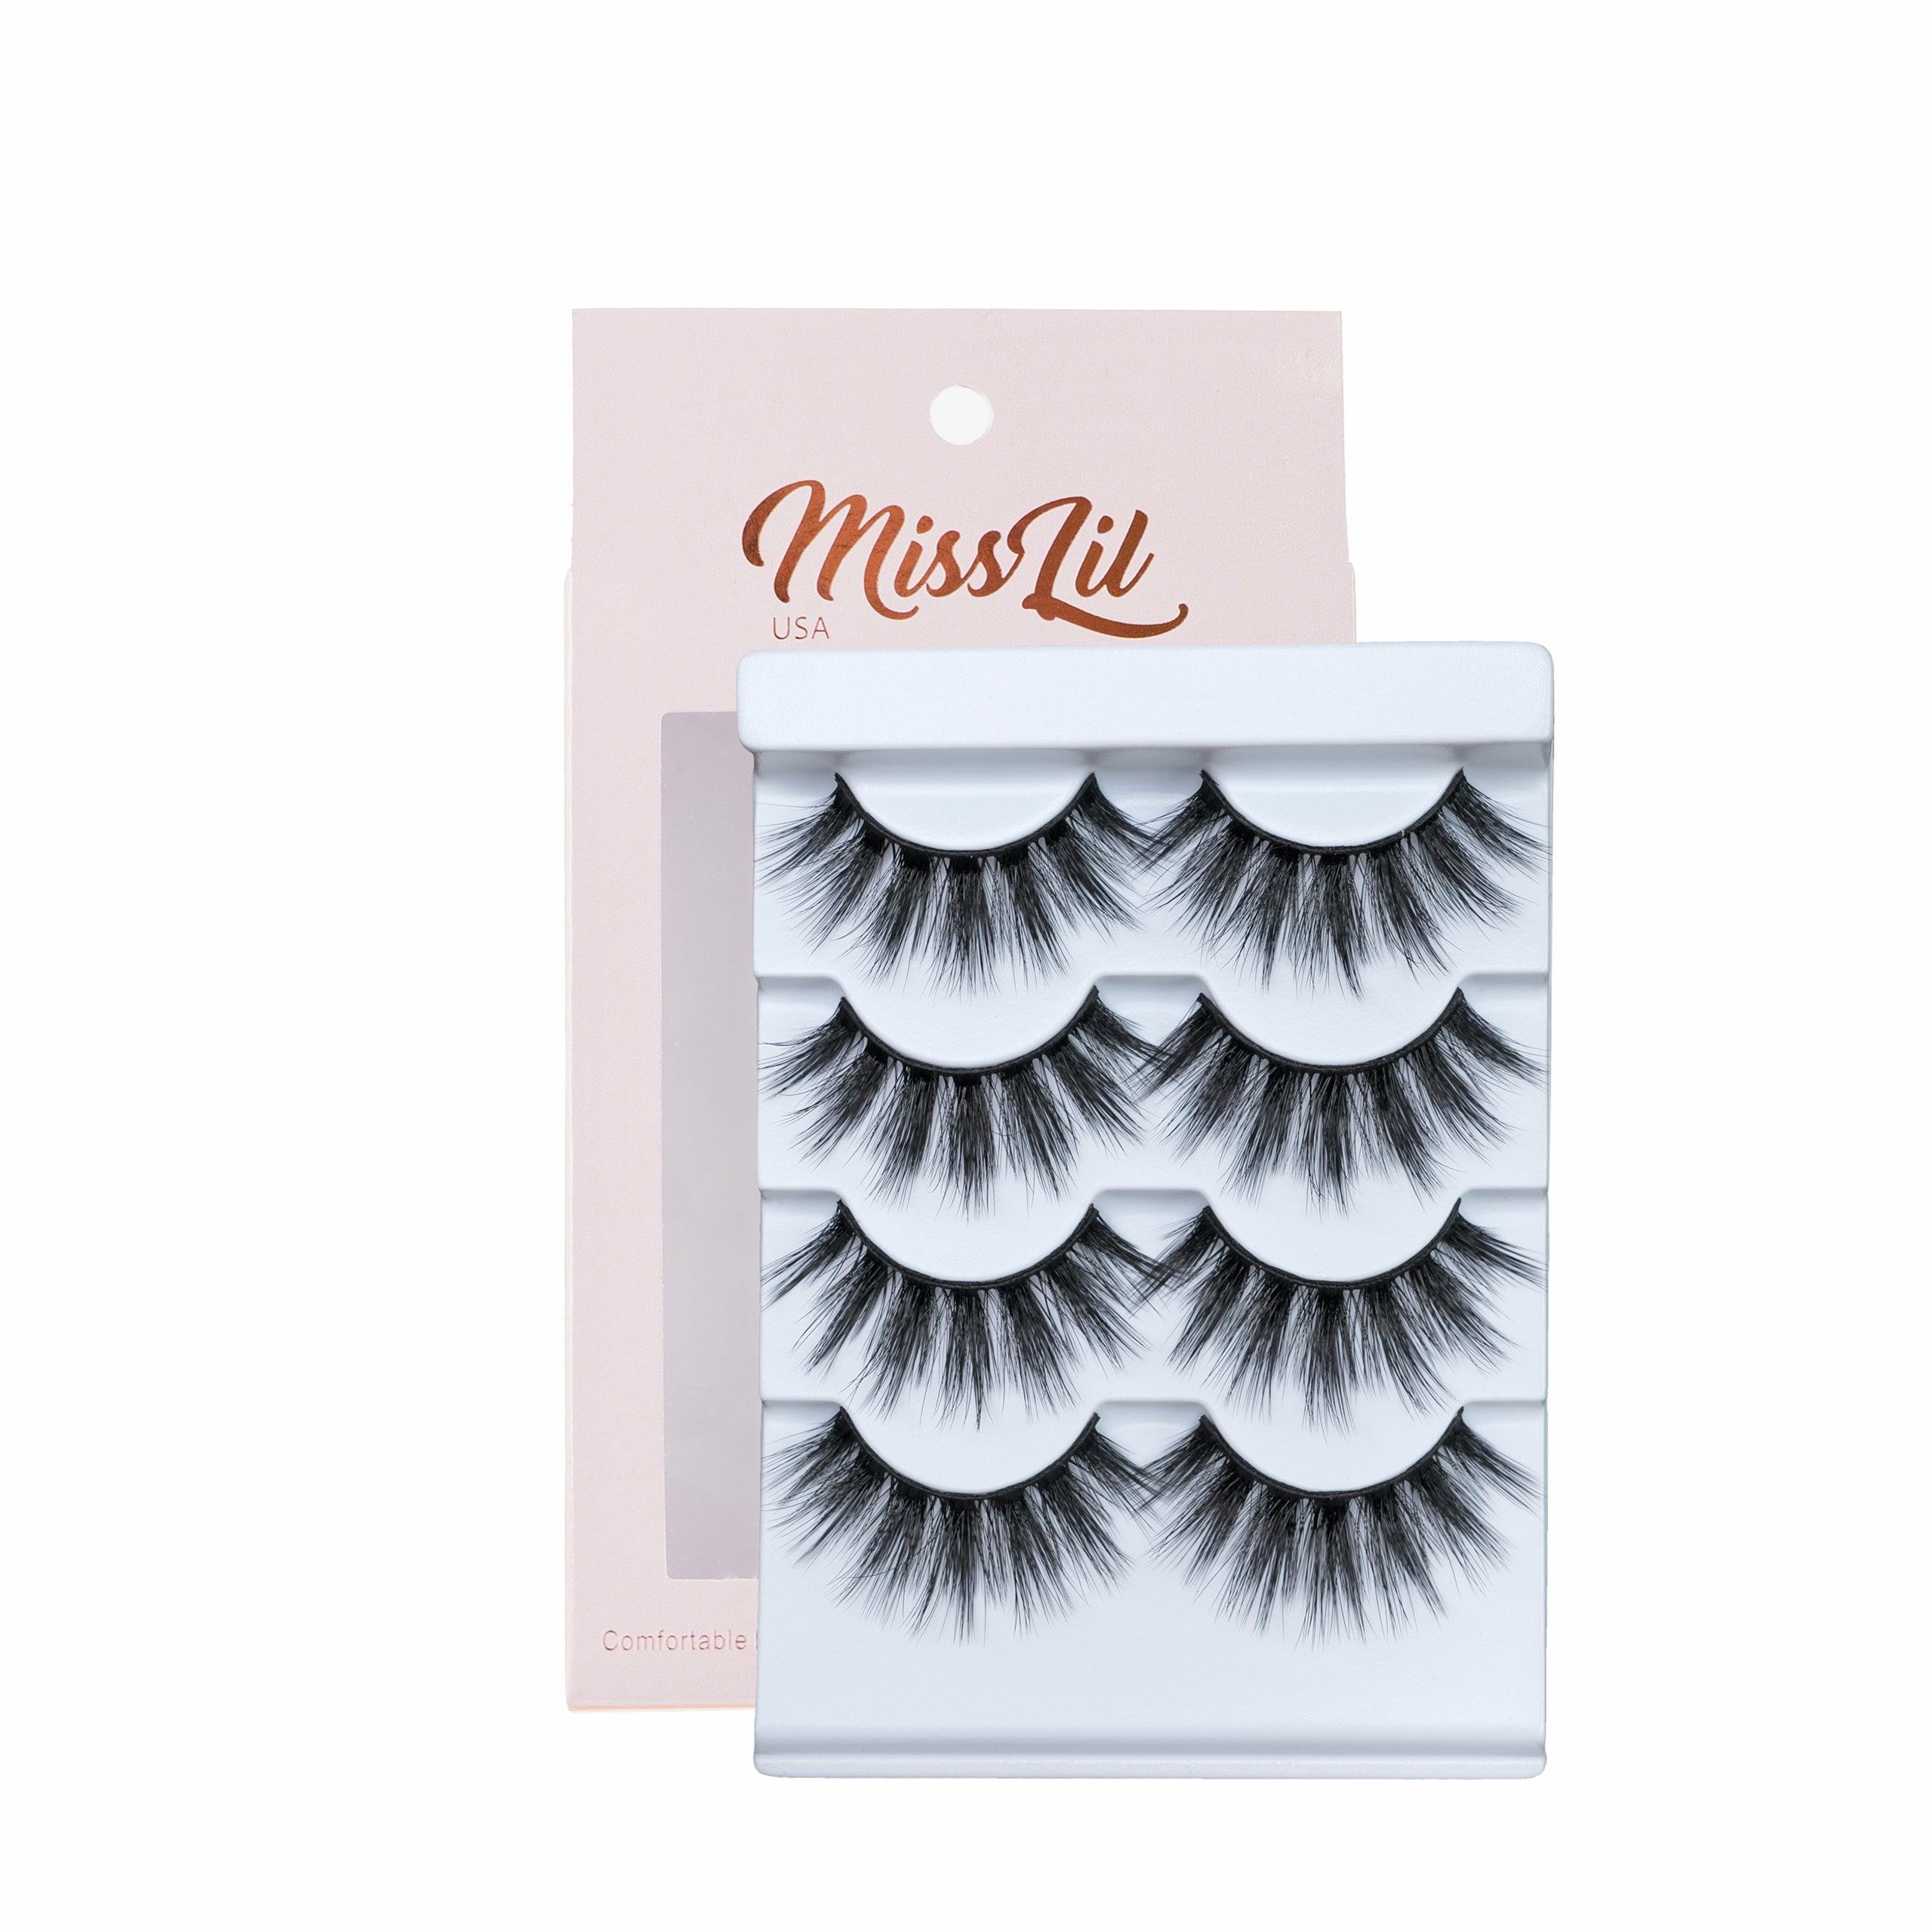 4 Pairs Lashes - Classic Collection #23 - Miss Lil USA